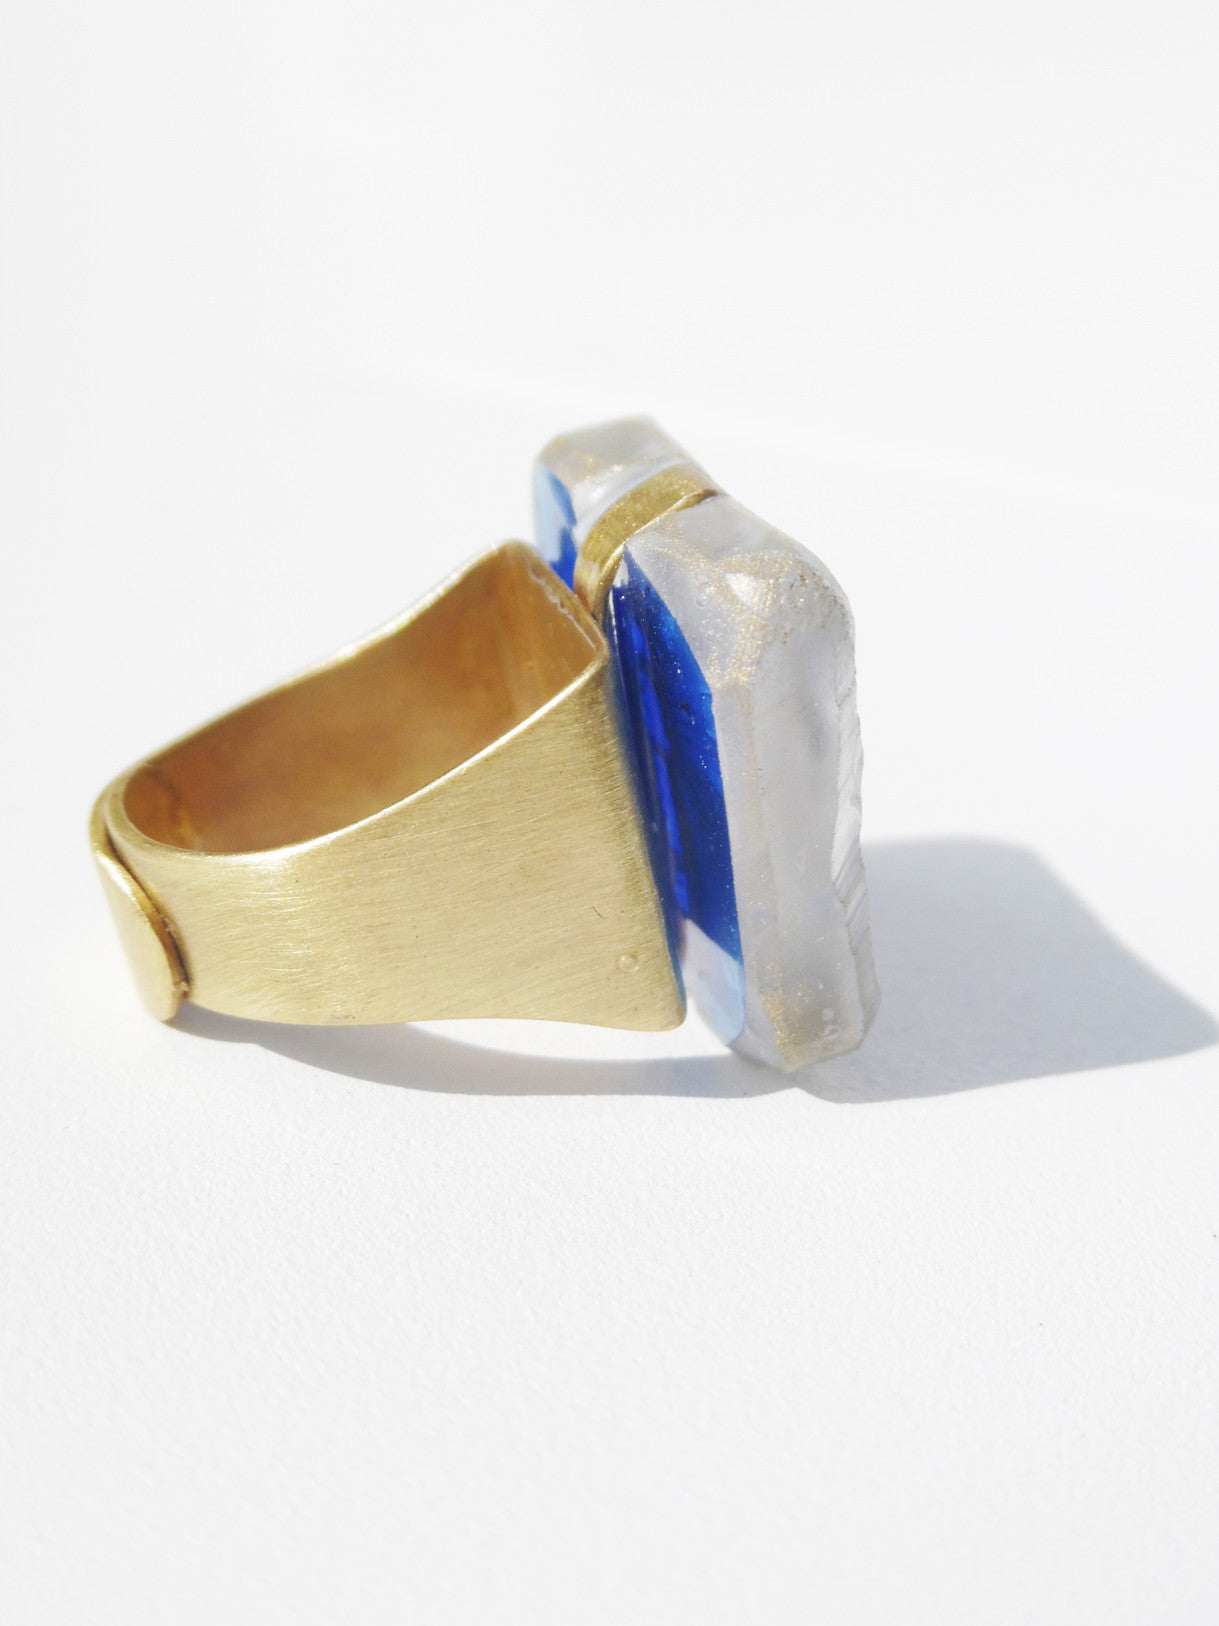 Ring Hand Cast French Glass Blue Gold Butterfly